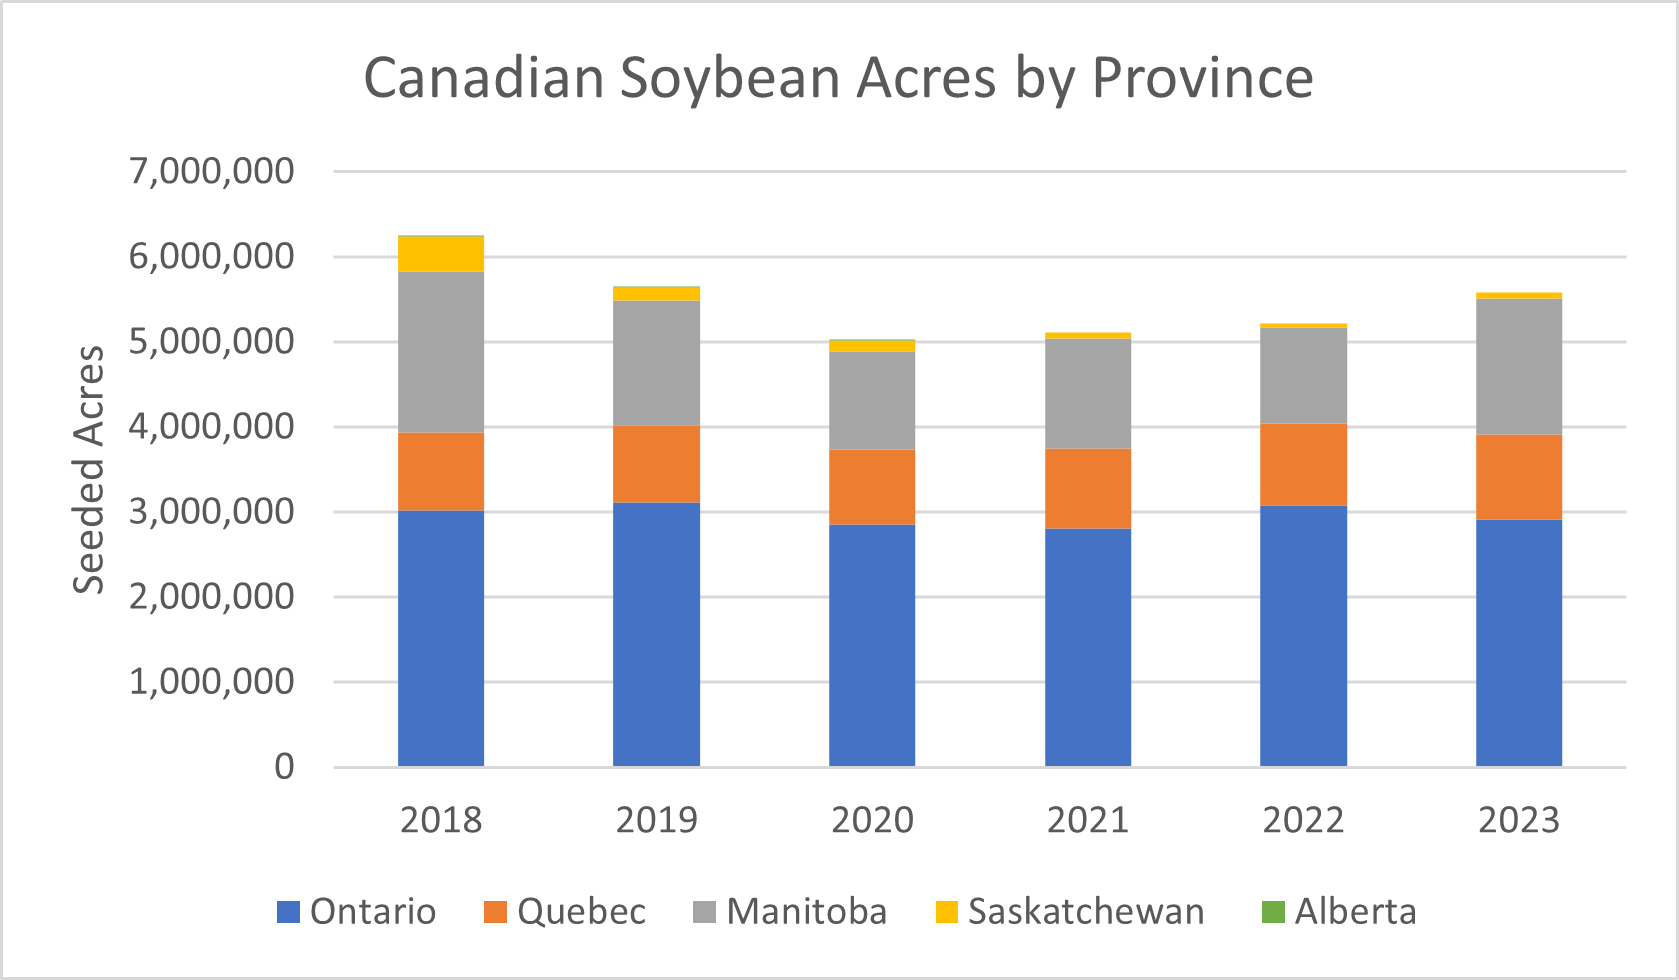 Canadian Soybean Acres by Province